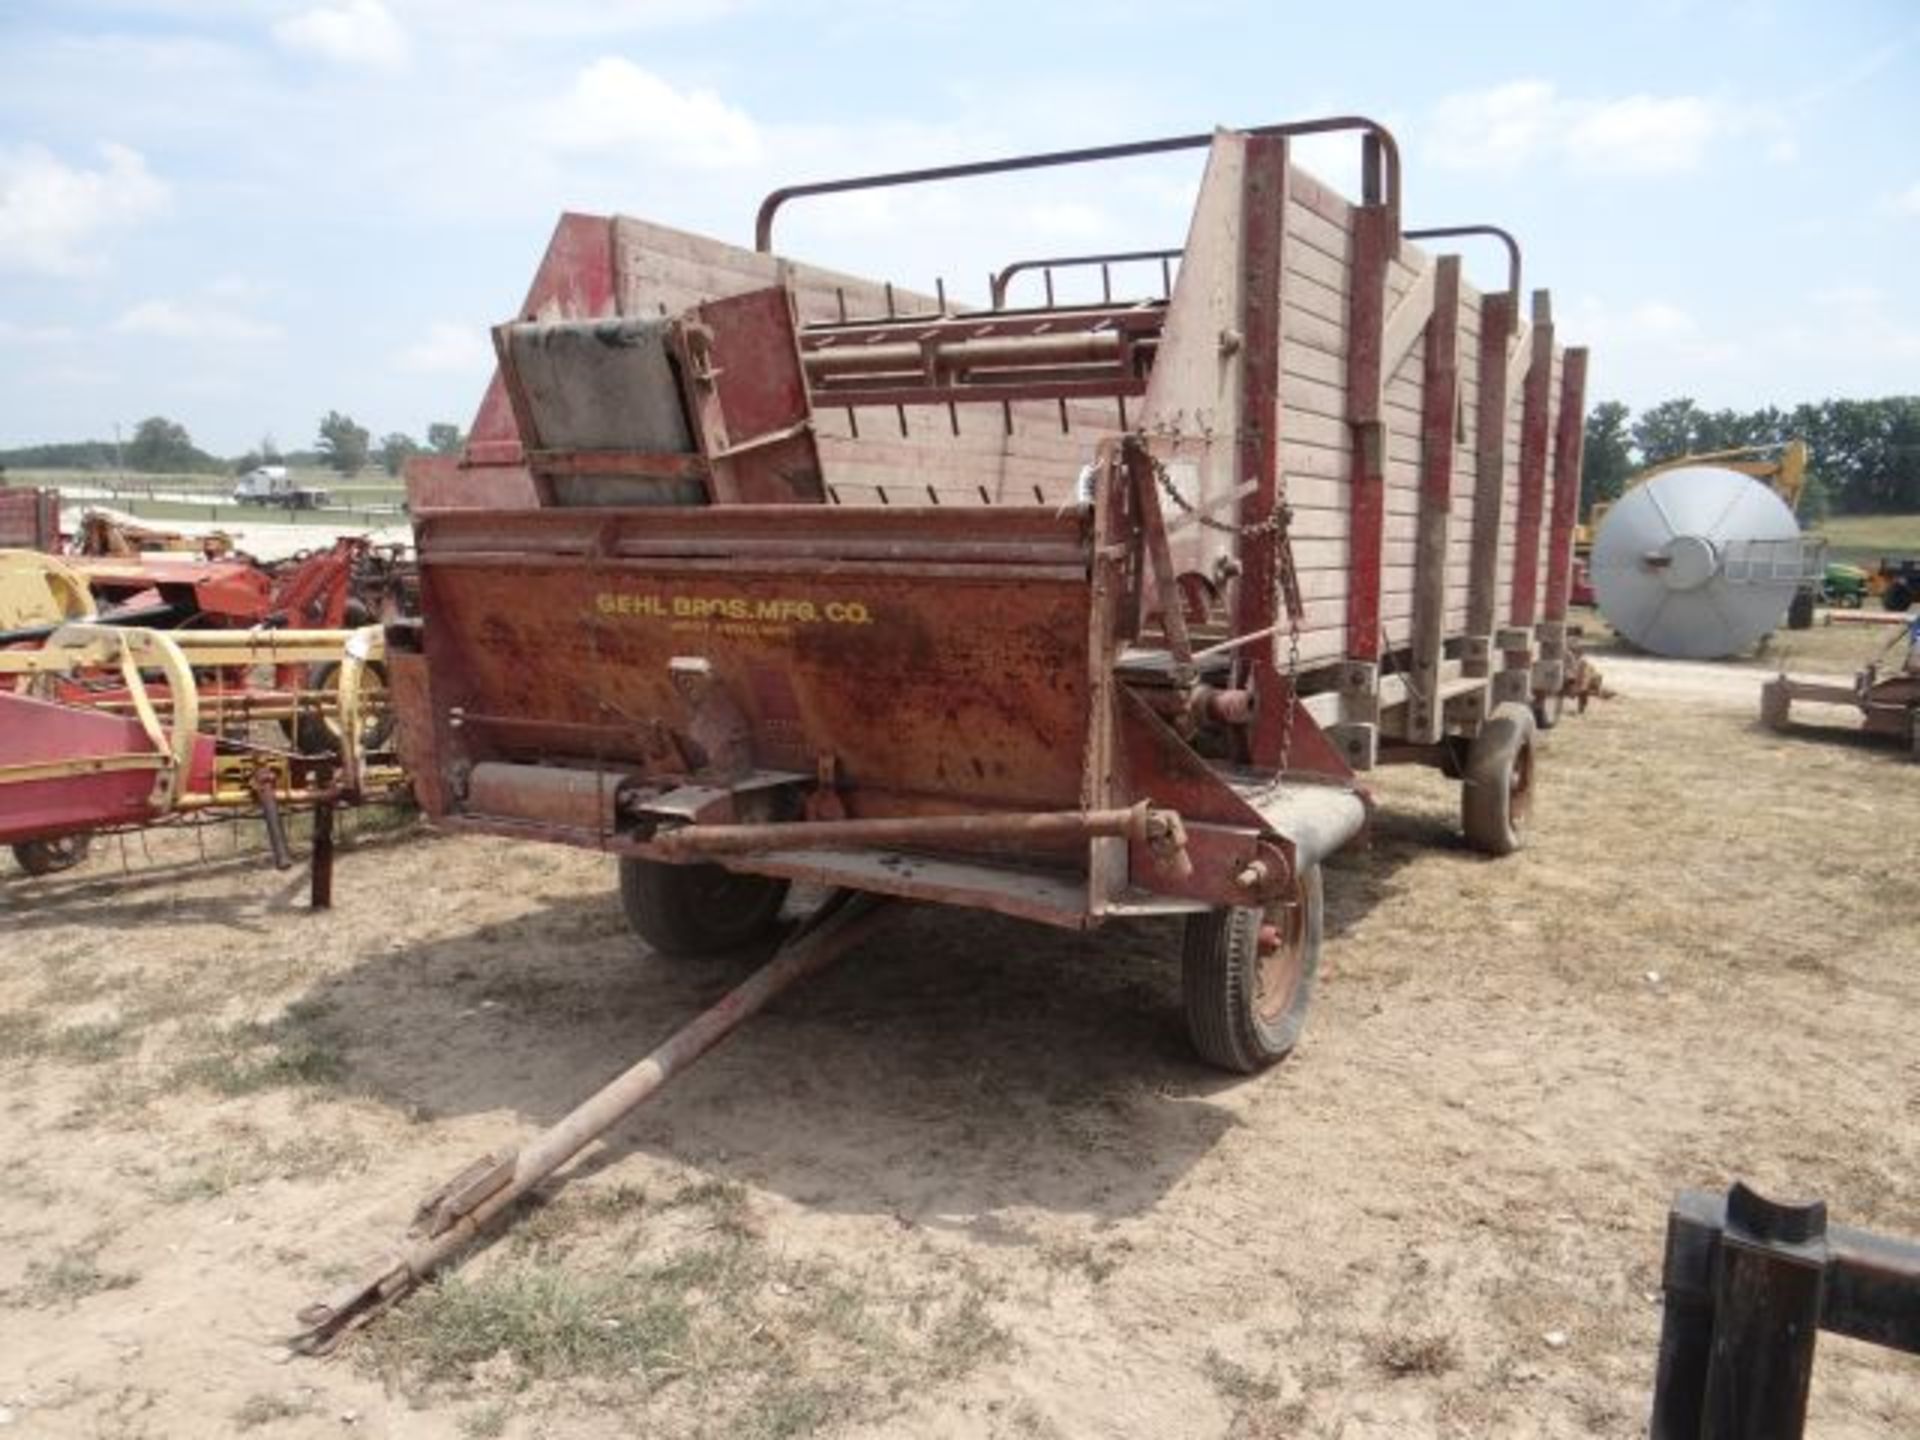 Gehl Silage Wagon 540 PTO, Manual in the Shed